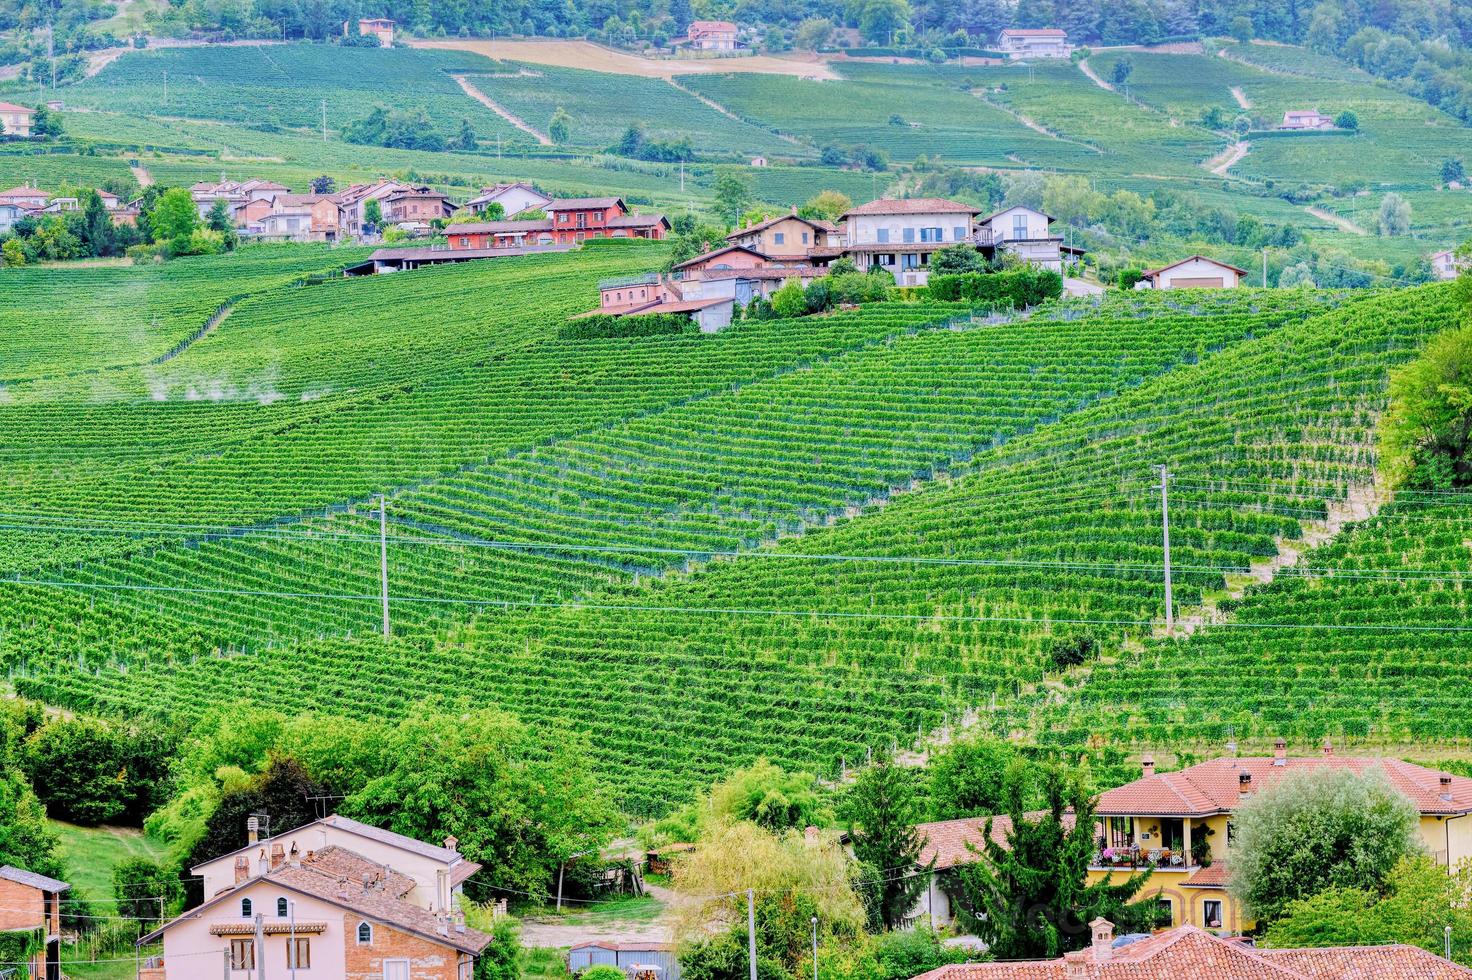 Typical vinery farm in the hilly region of Langhe, Italy. UNESCO site photo